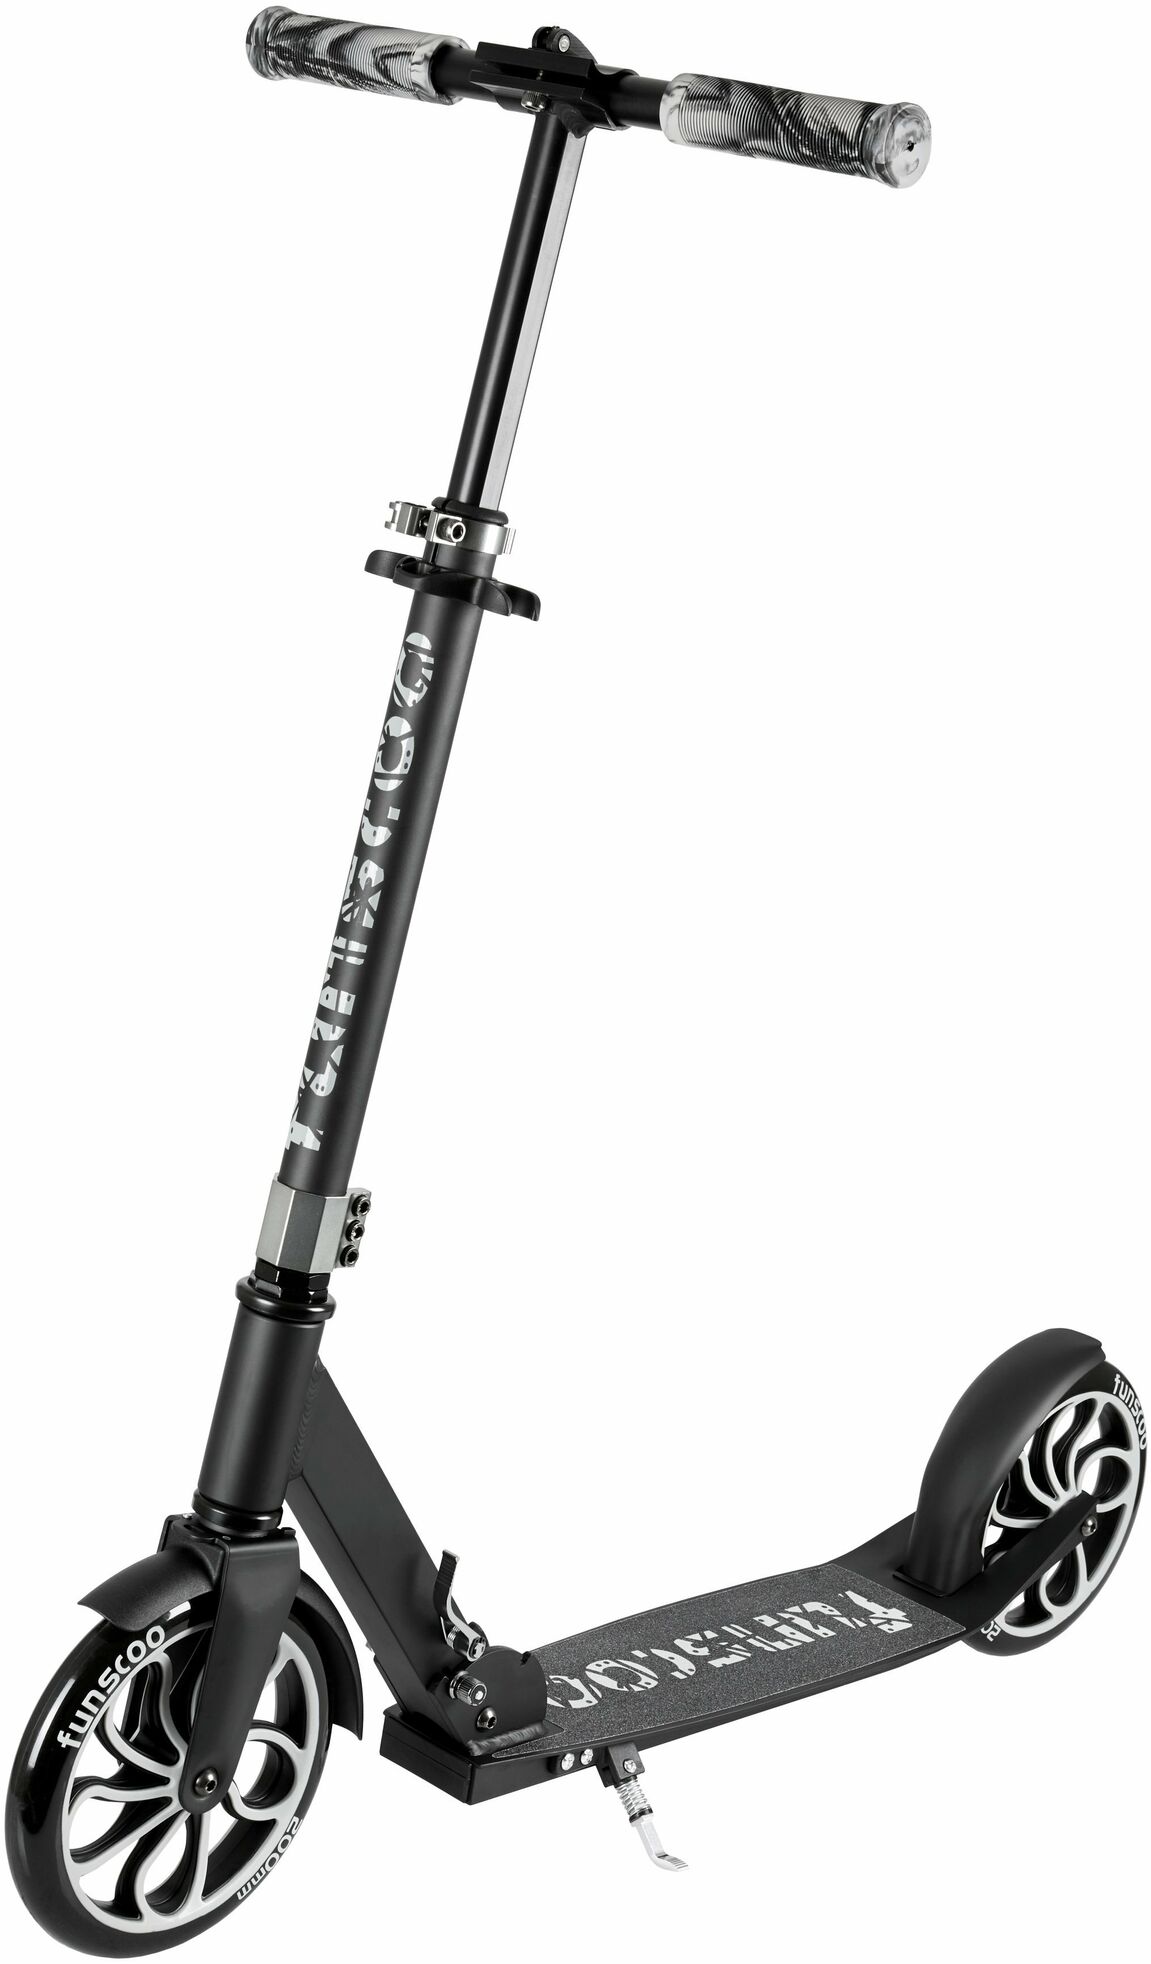 skate-scooter: Funscoo funscoo Scooter  200 (swsi) 